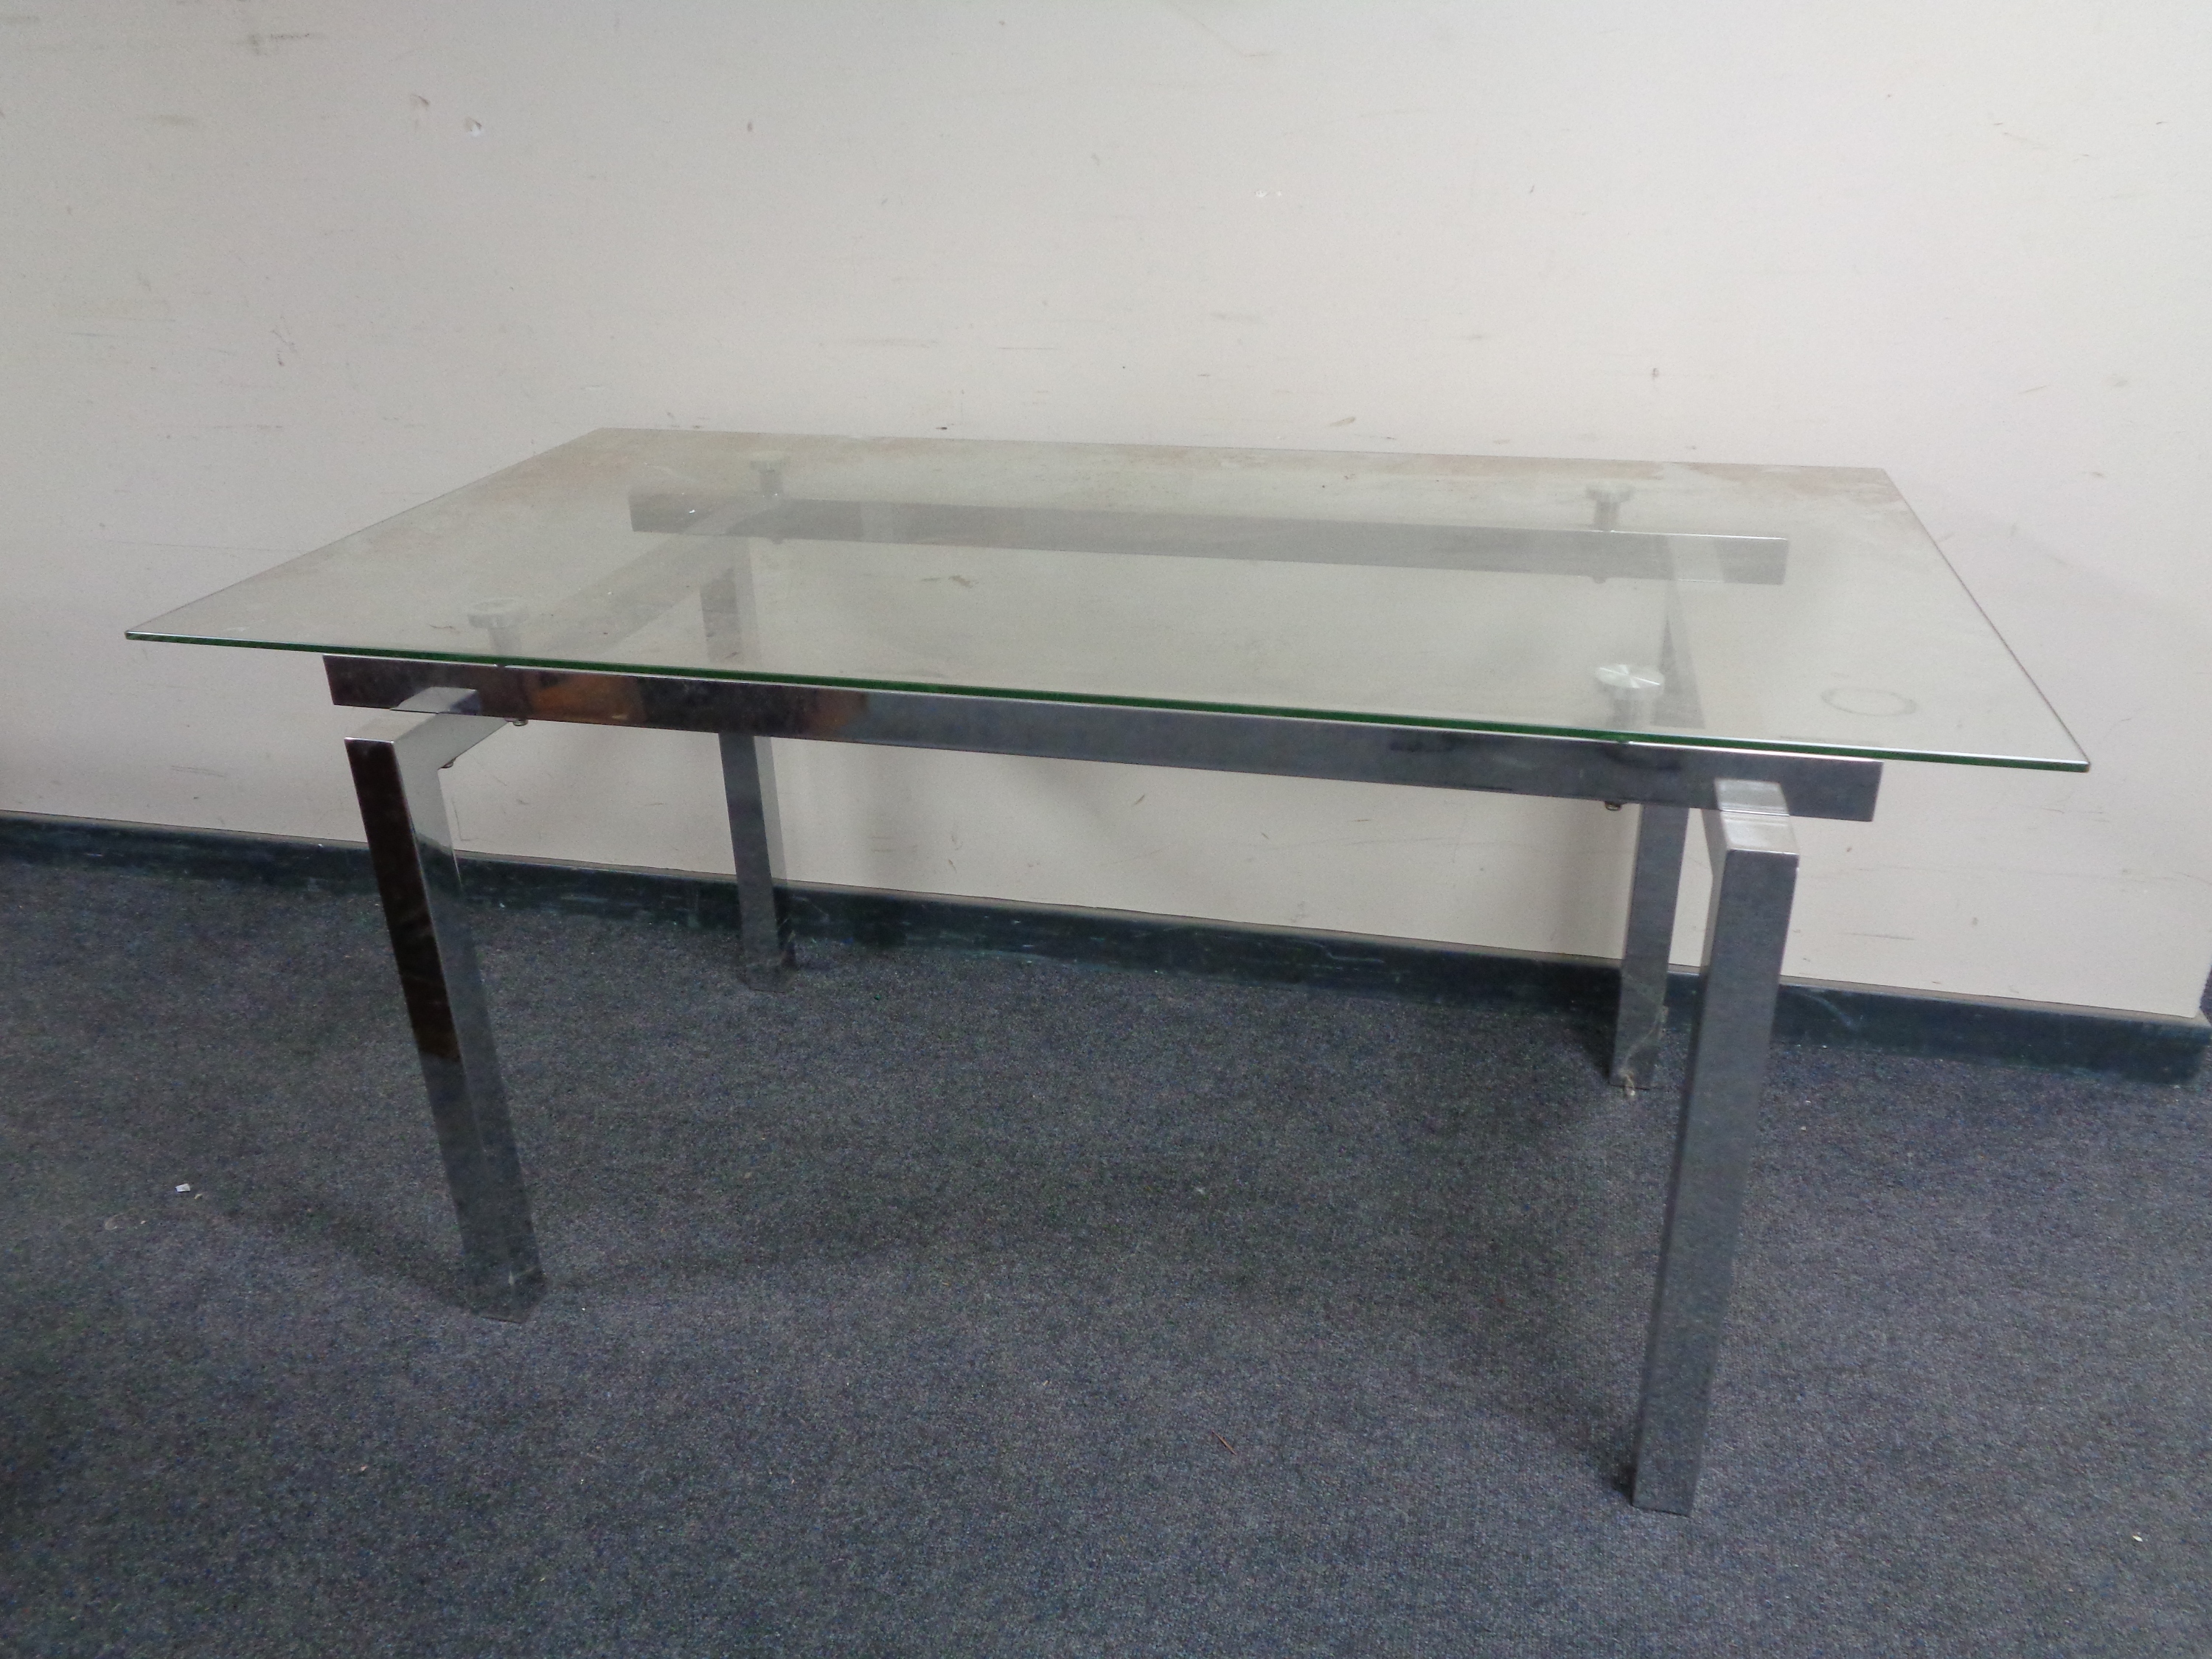 A contemporary chrome dining table with glass top